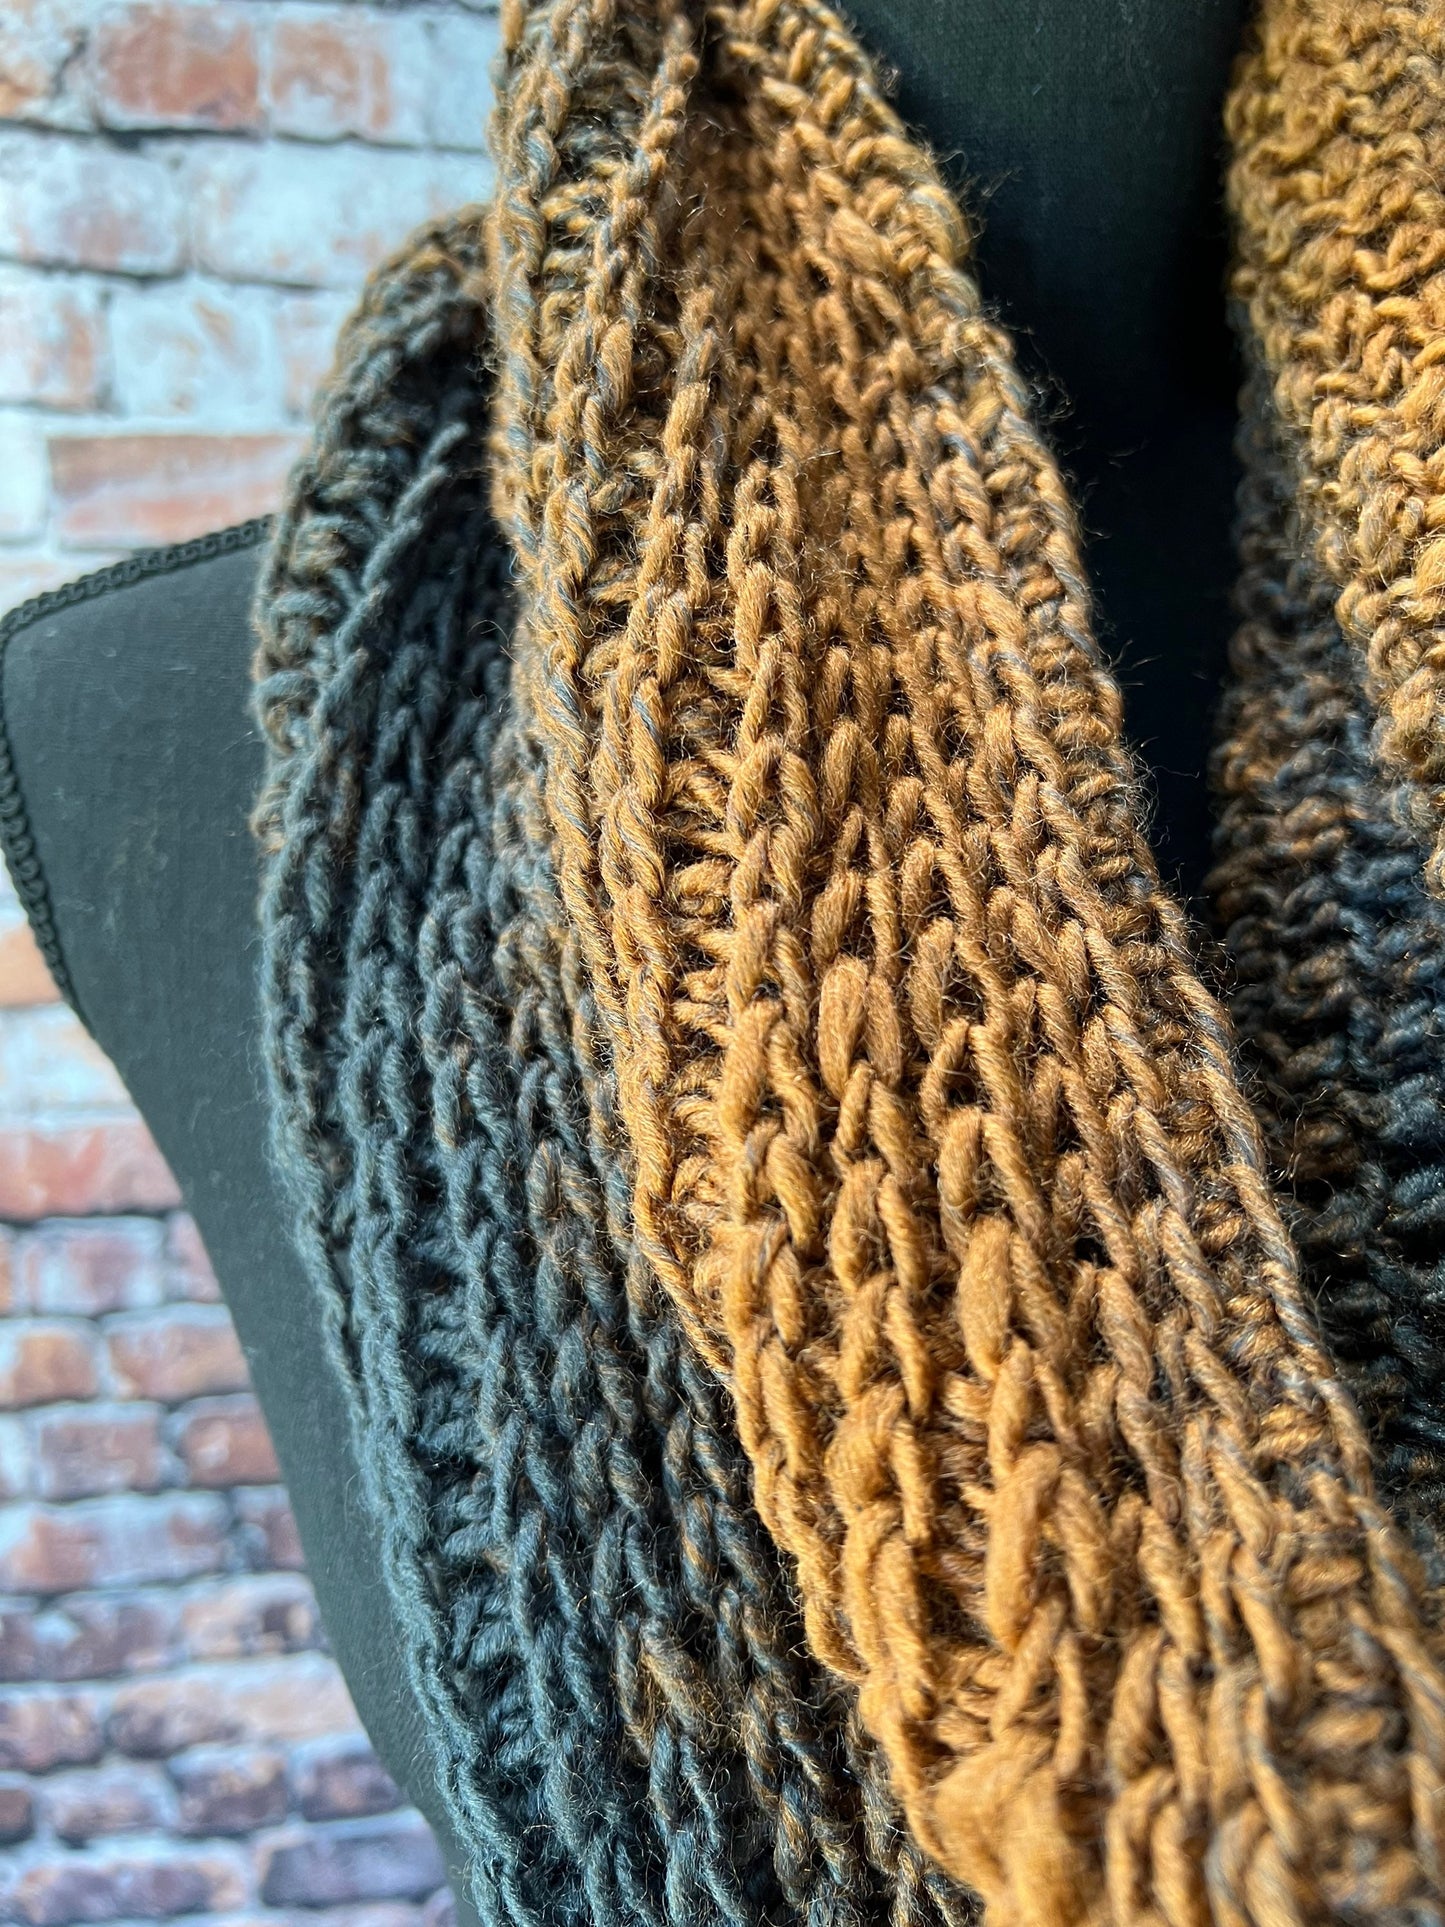 Rust and Charcoal Women's Chunky Infinity | Neutral Colored Women's Cowl | Black and Tan Knit Scarf | Crochet Infinity Cowl